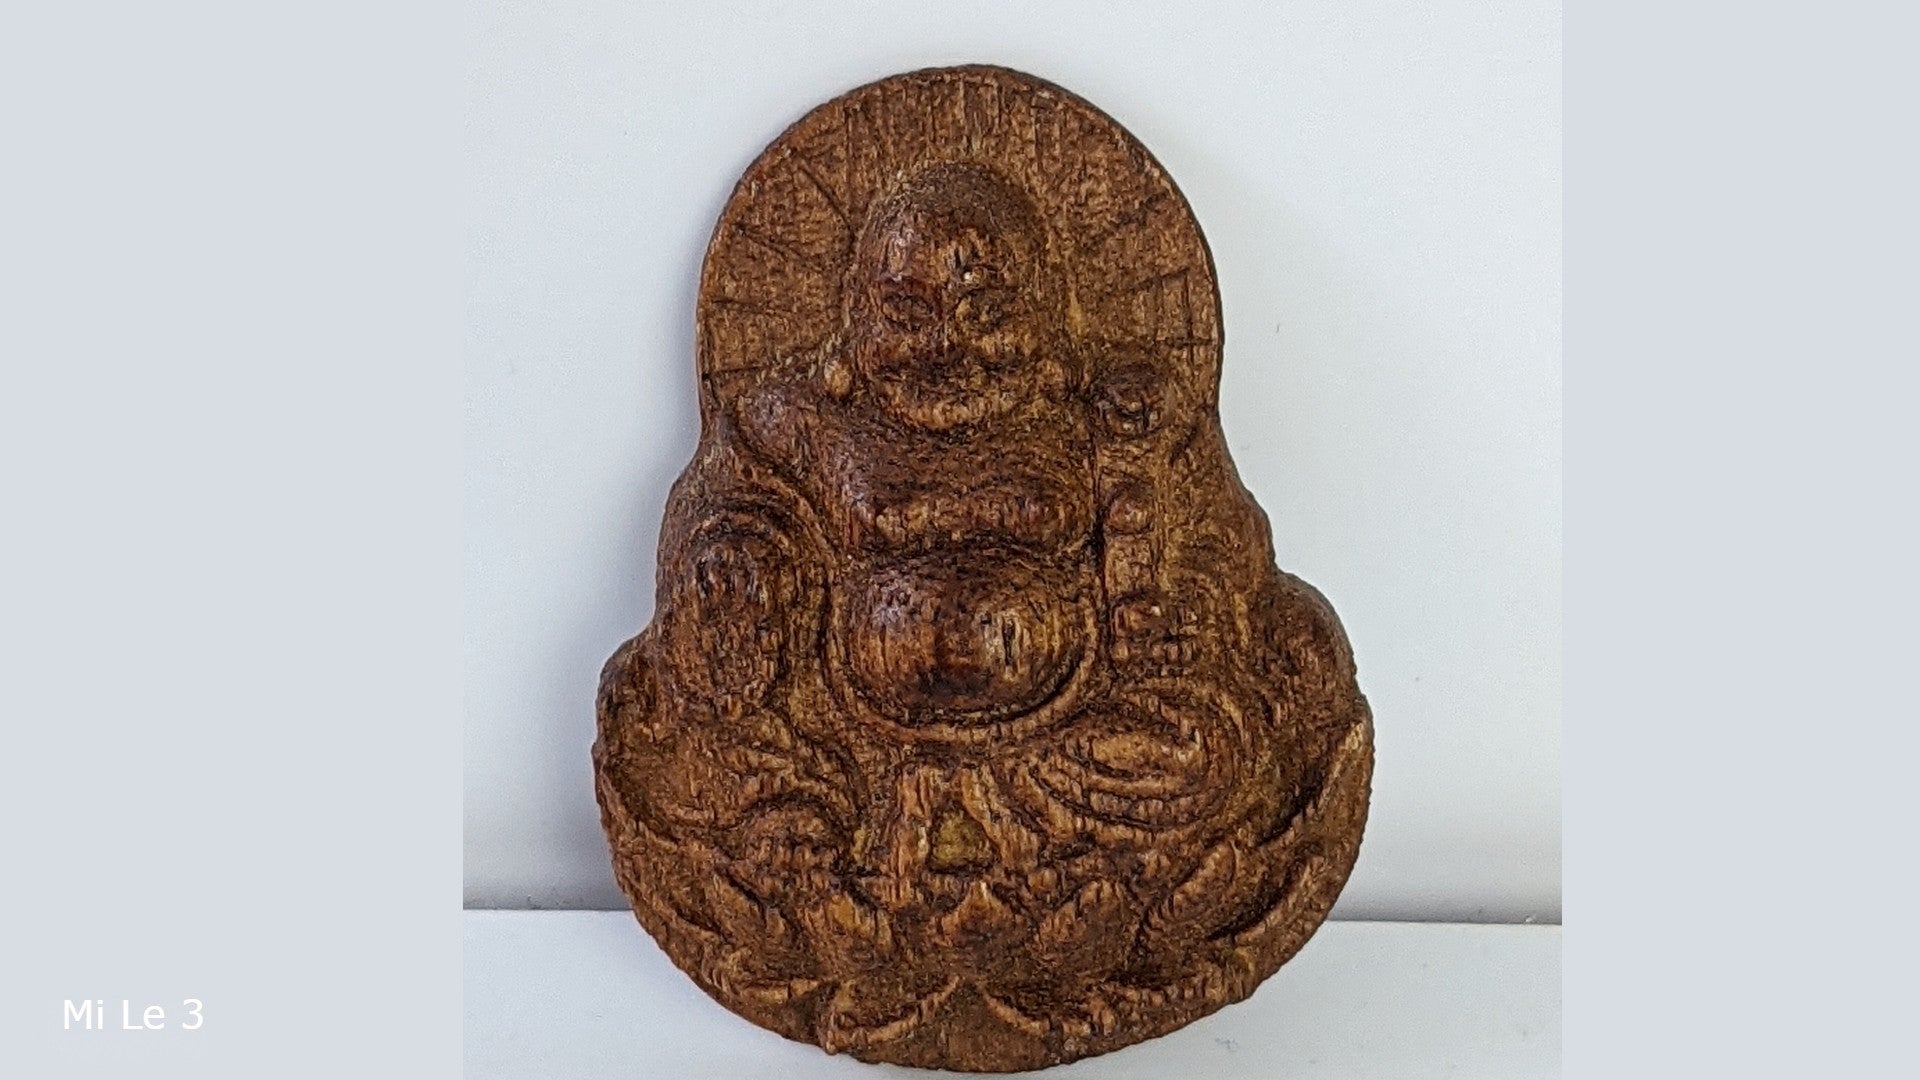 Cultivated Agarwood Pendant Guan Yin The Goddess of Mercy and Mi Le Laughing Buddha - Mi Le 3 w 2.8g